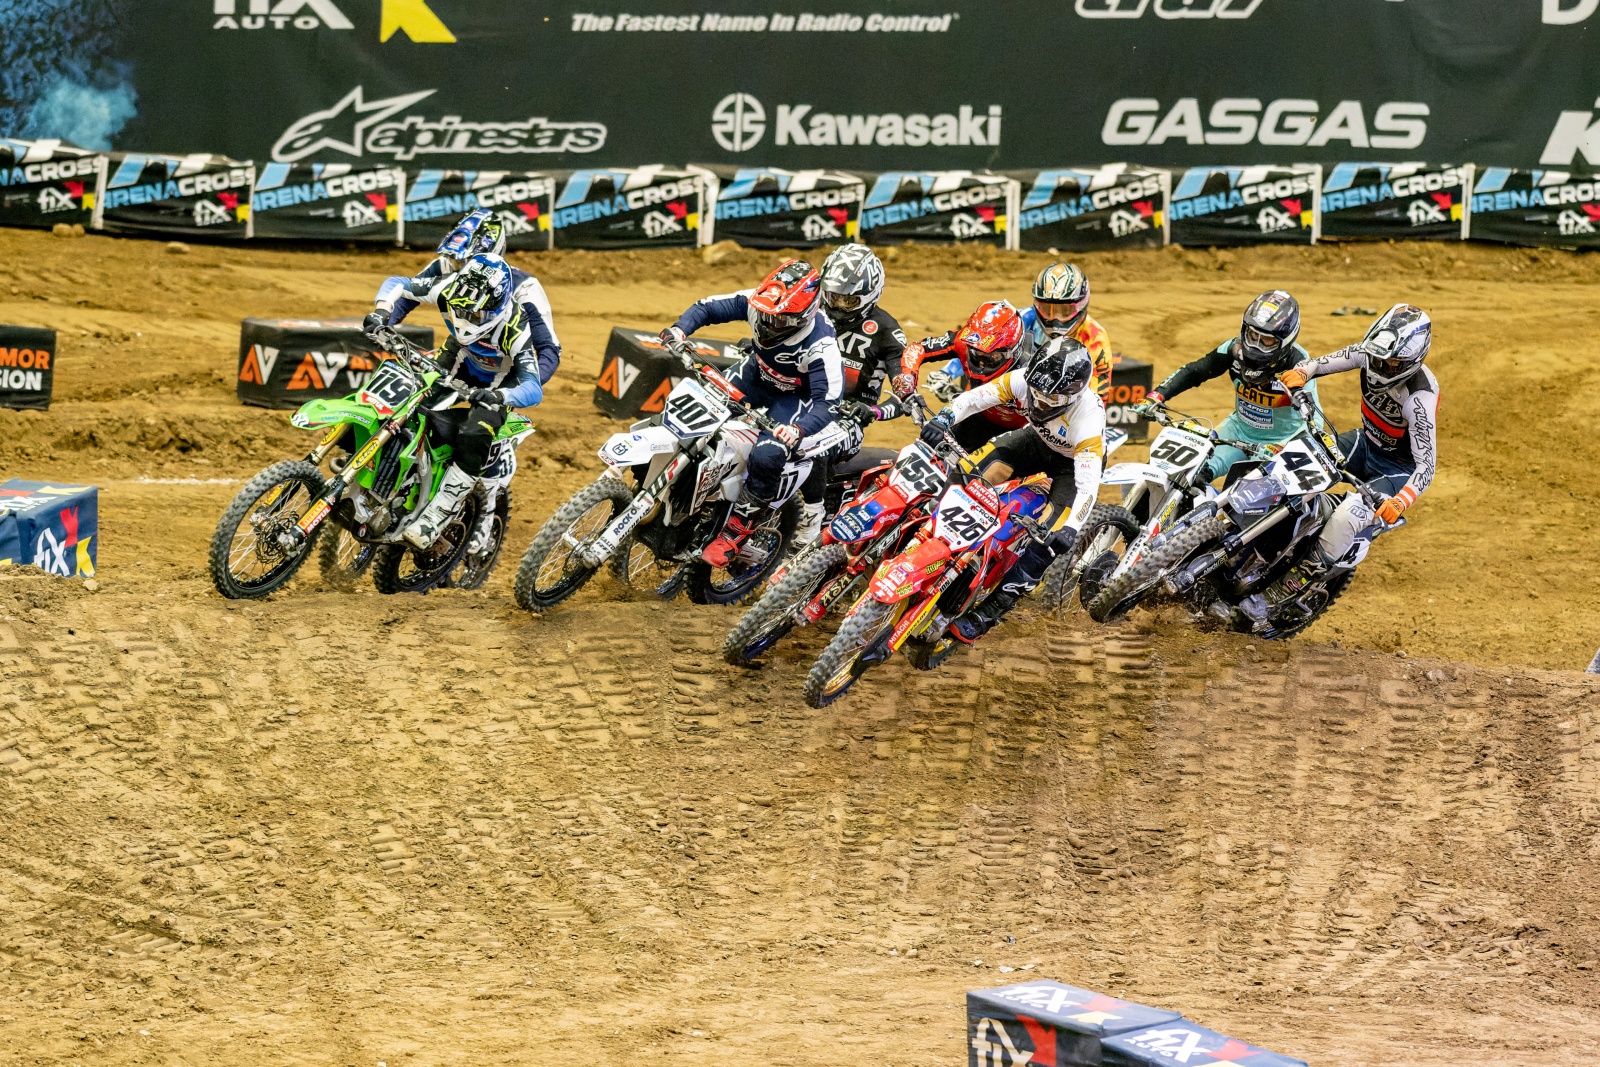 ARENACROSS CHARGES TO PENULTIMATE ROUND AT BIRMINGHAM